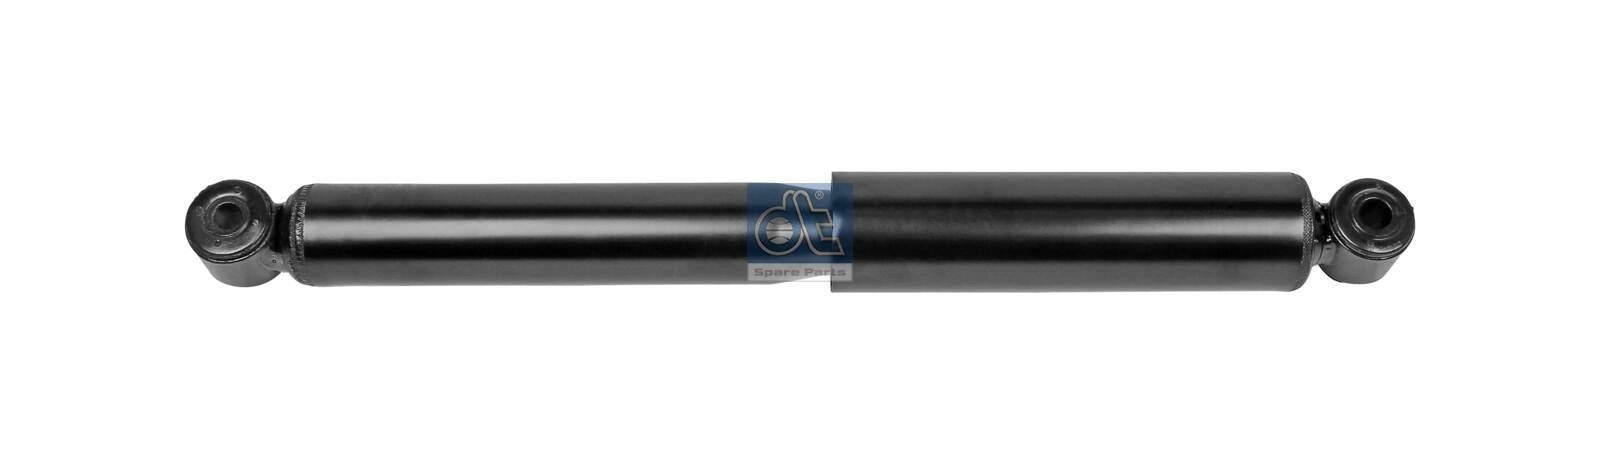 Mercedes T1 Bus Shock absorbers 8306009 DT Spare Parts 4.66594 online buy